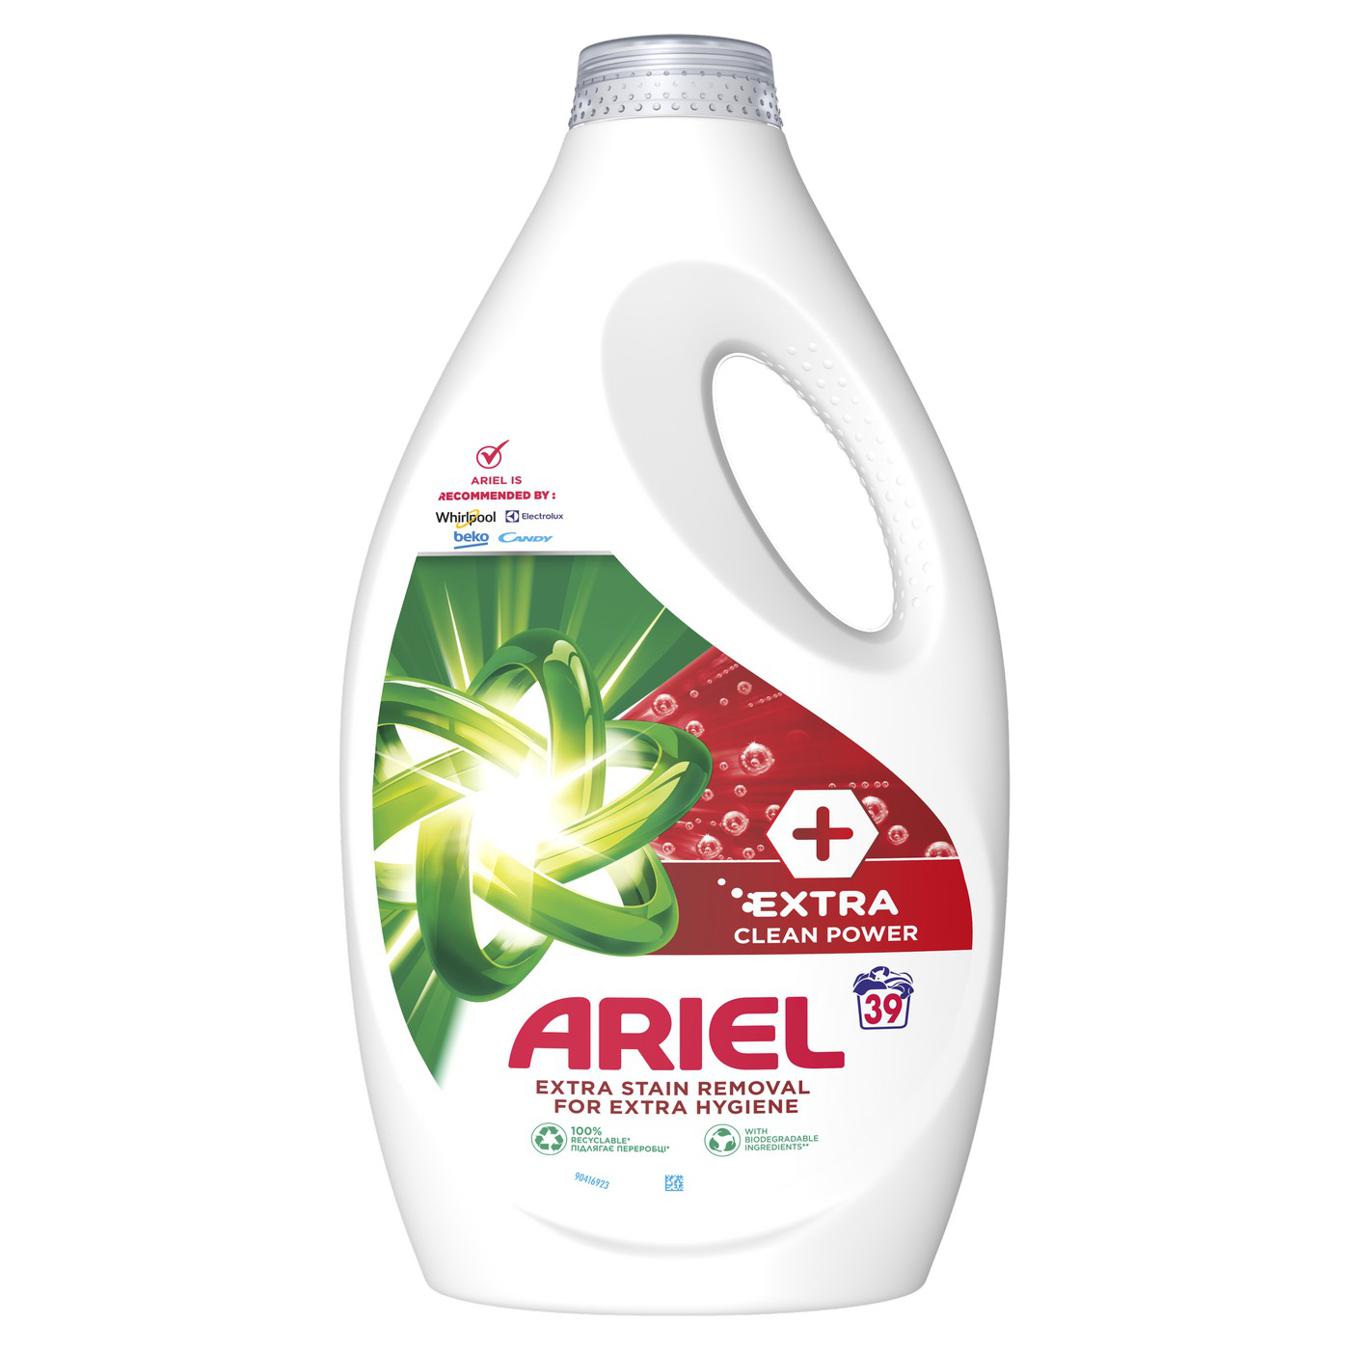 Gel for washing Ariel power of extra cleaning 1.95 l